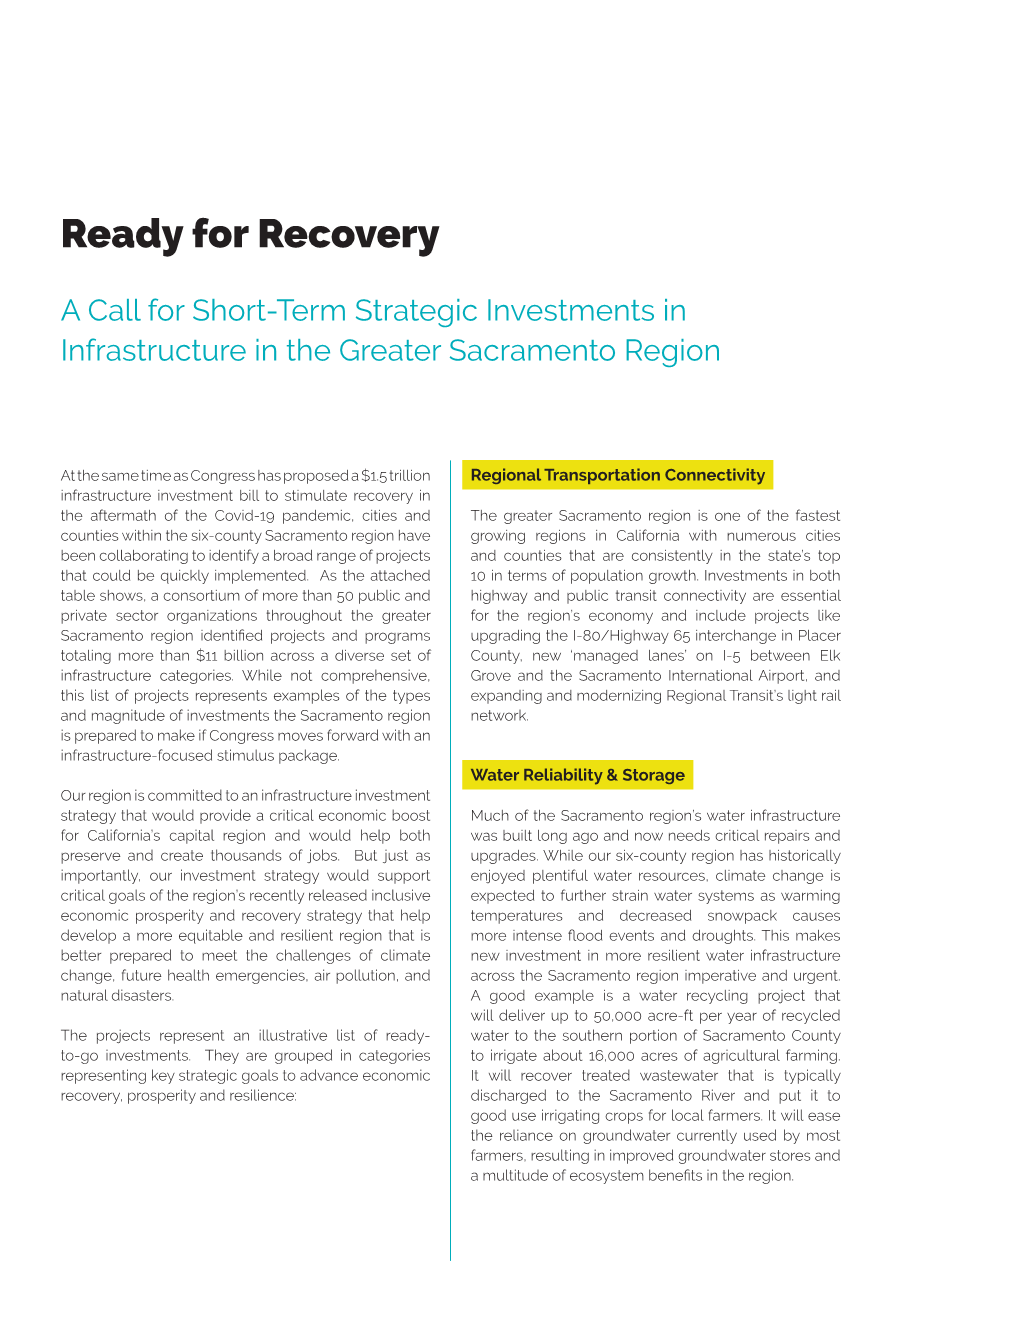 Ready for Recovery Project List